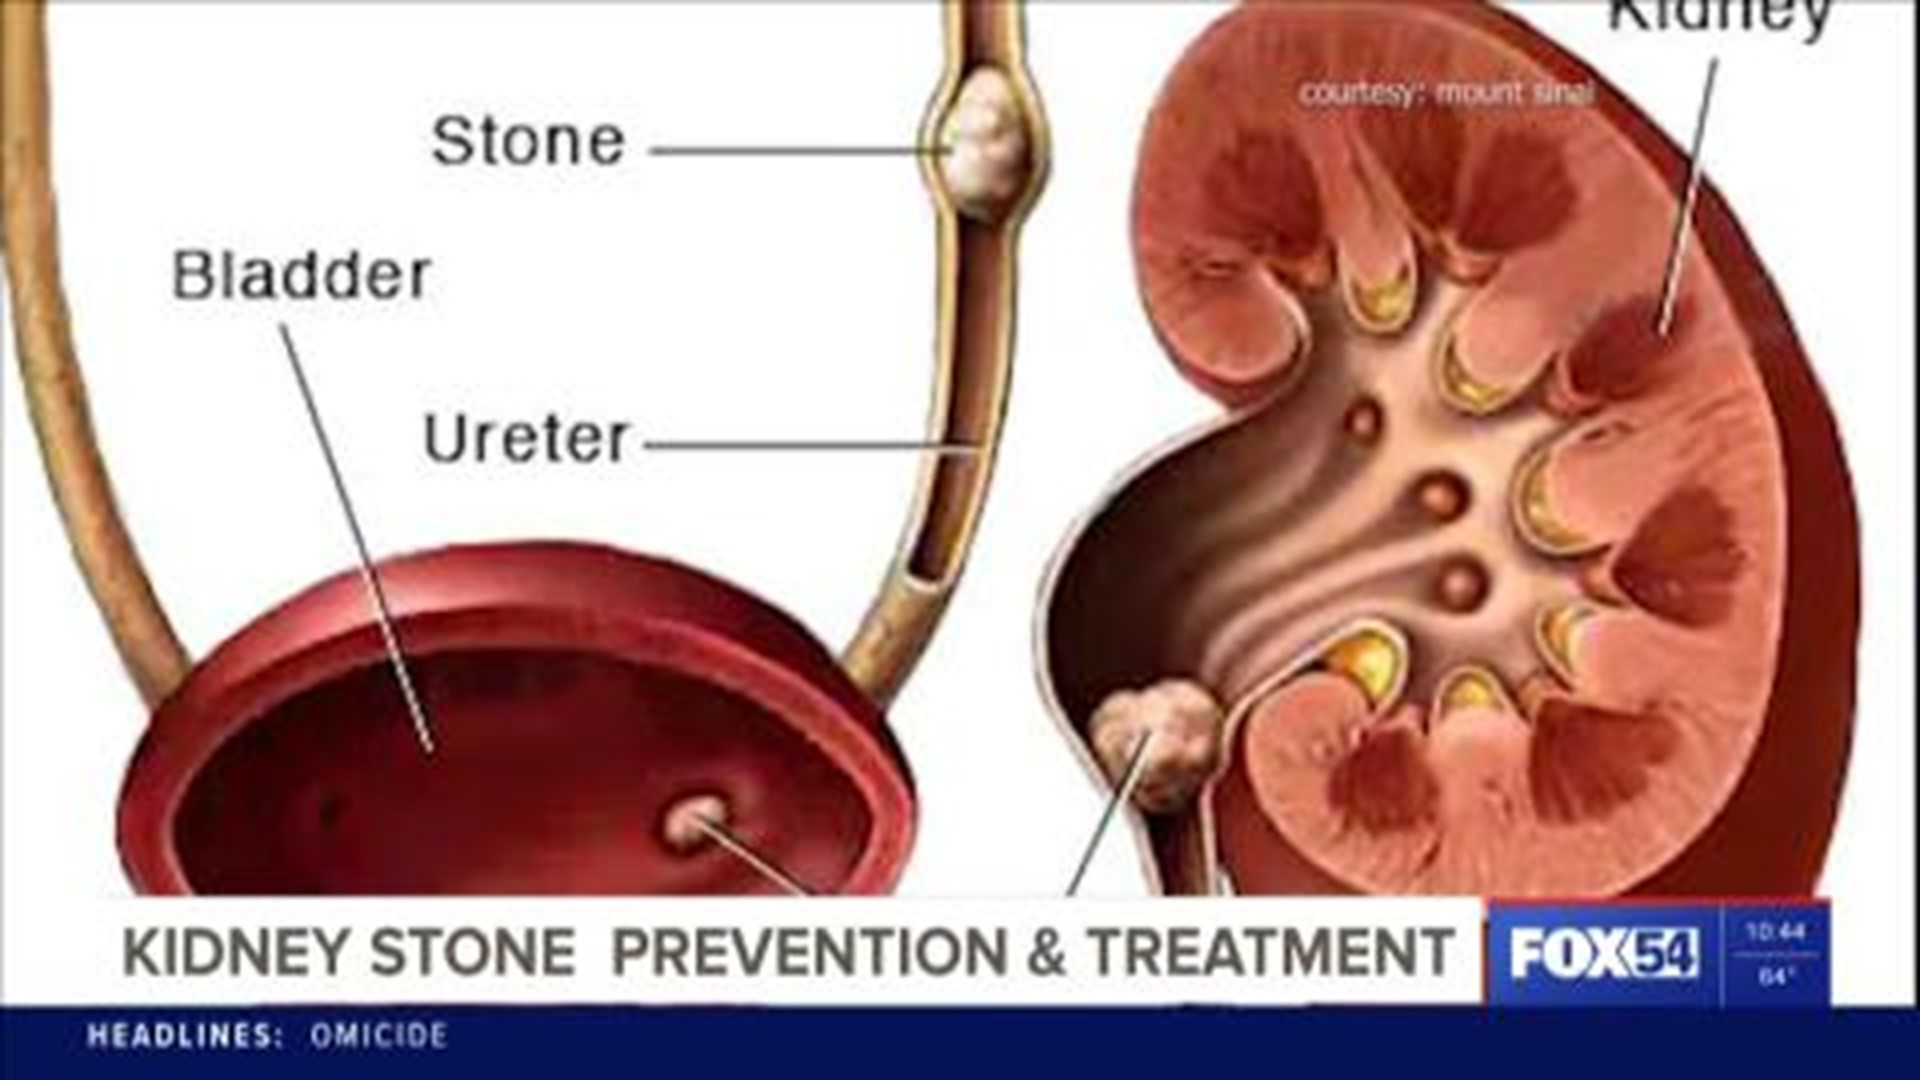 What you need to know about kidney stones and your health.